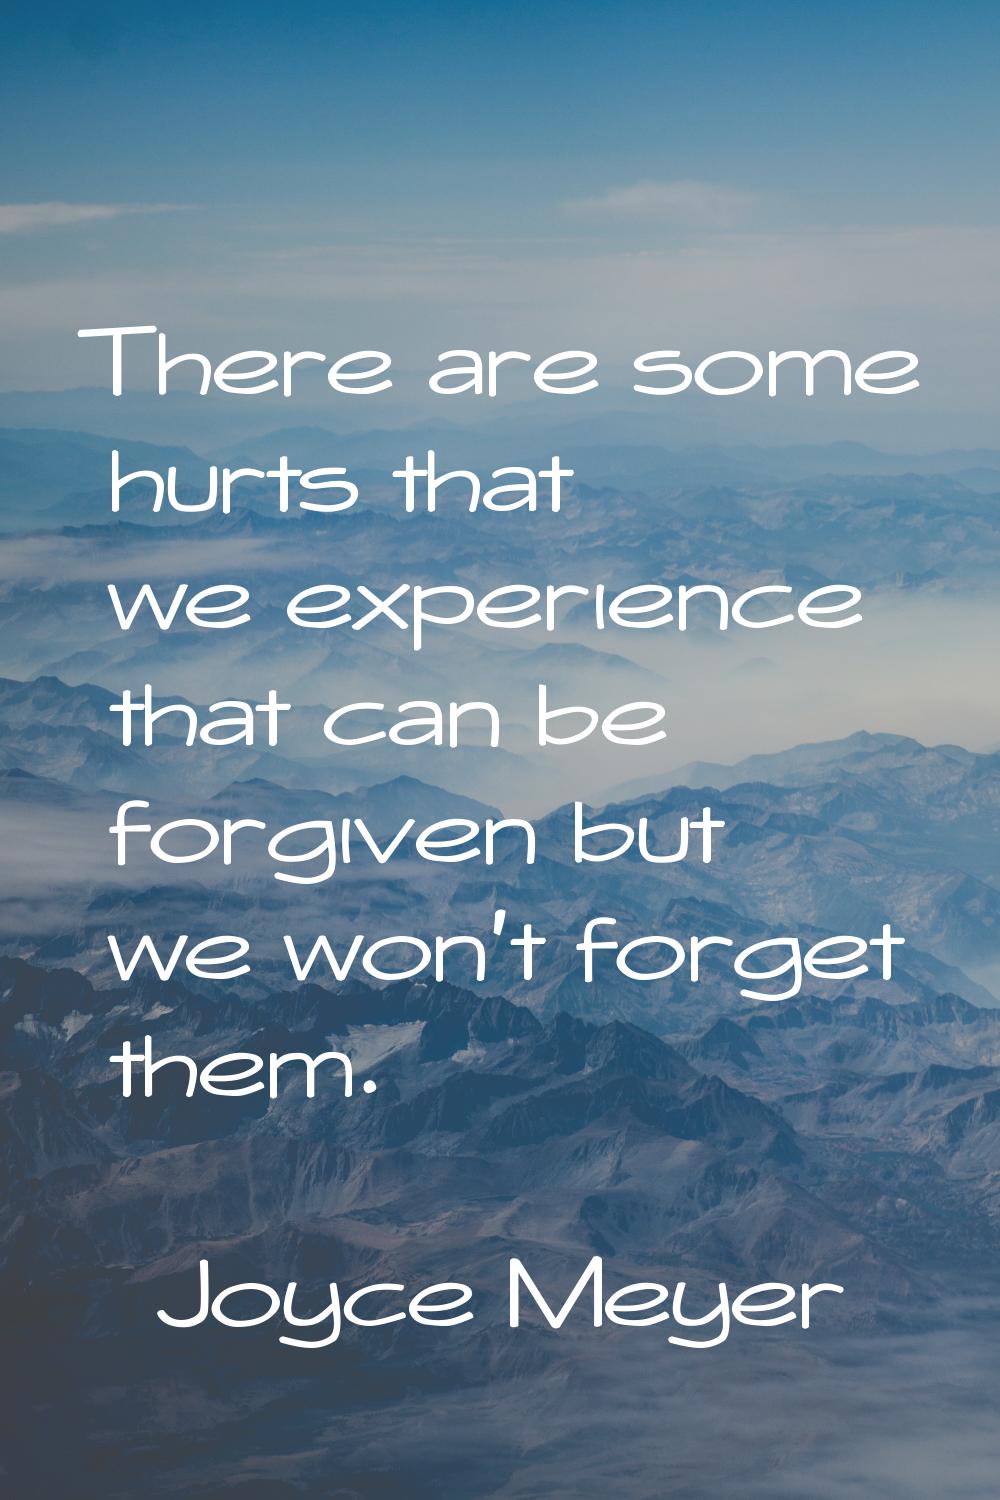 There are some hurts that we experience that can be forgiven but we won't forget them.